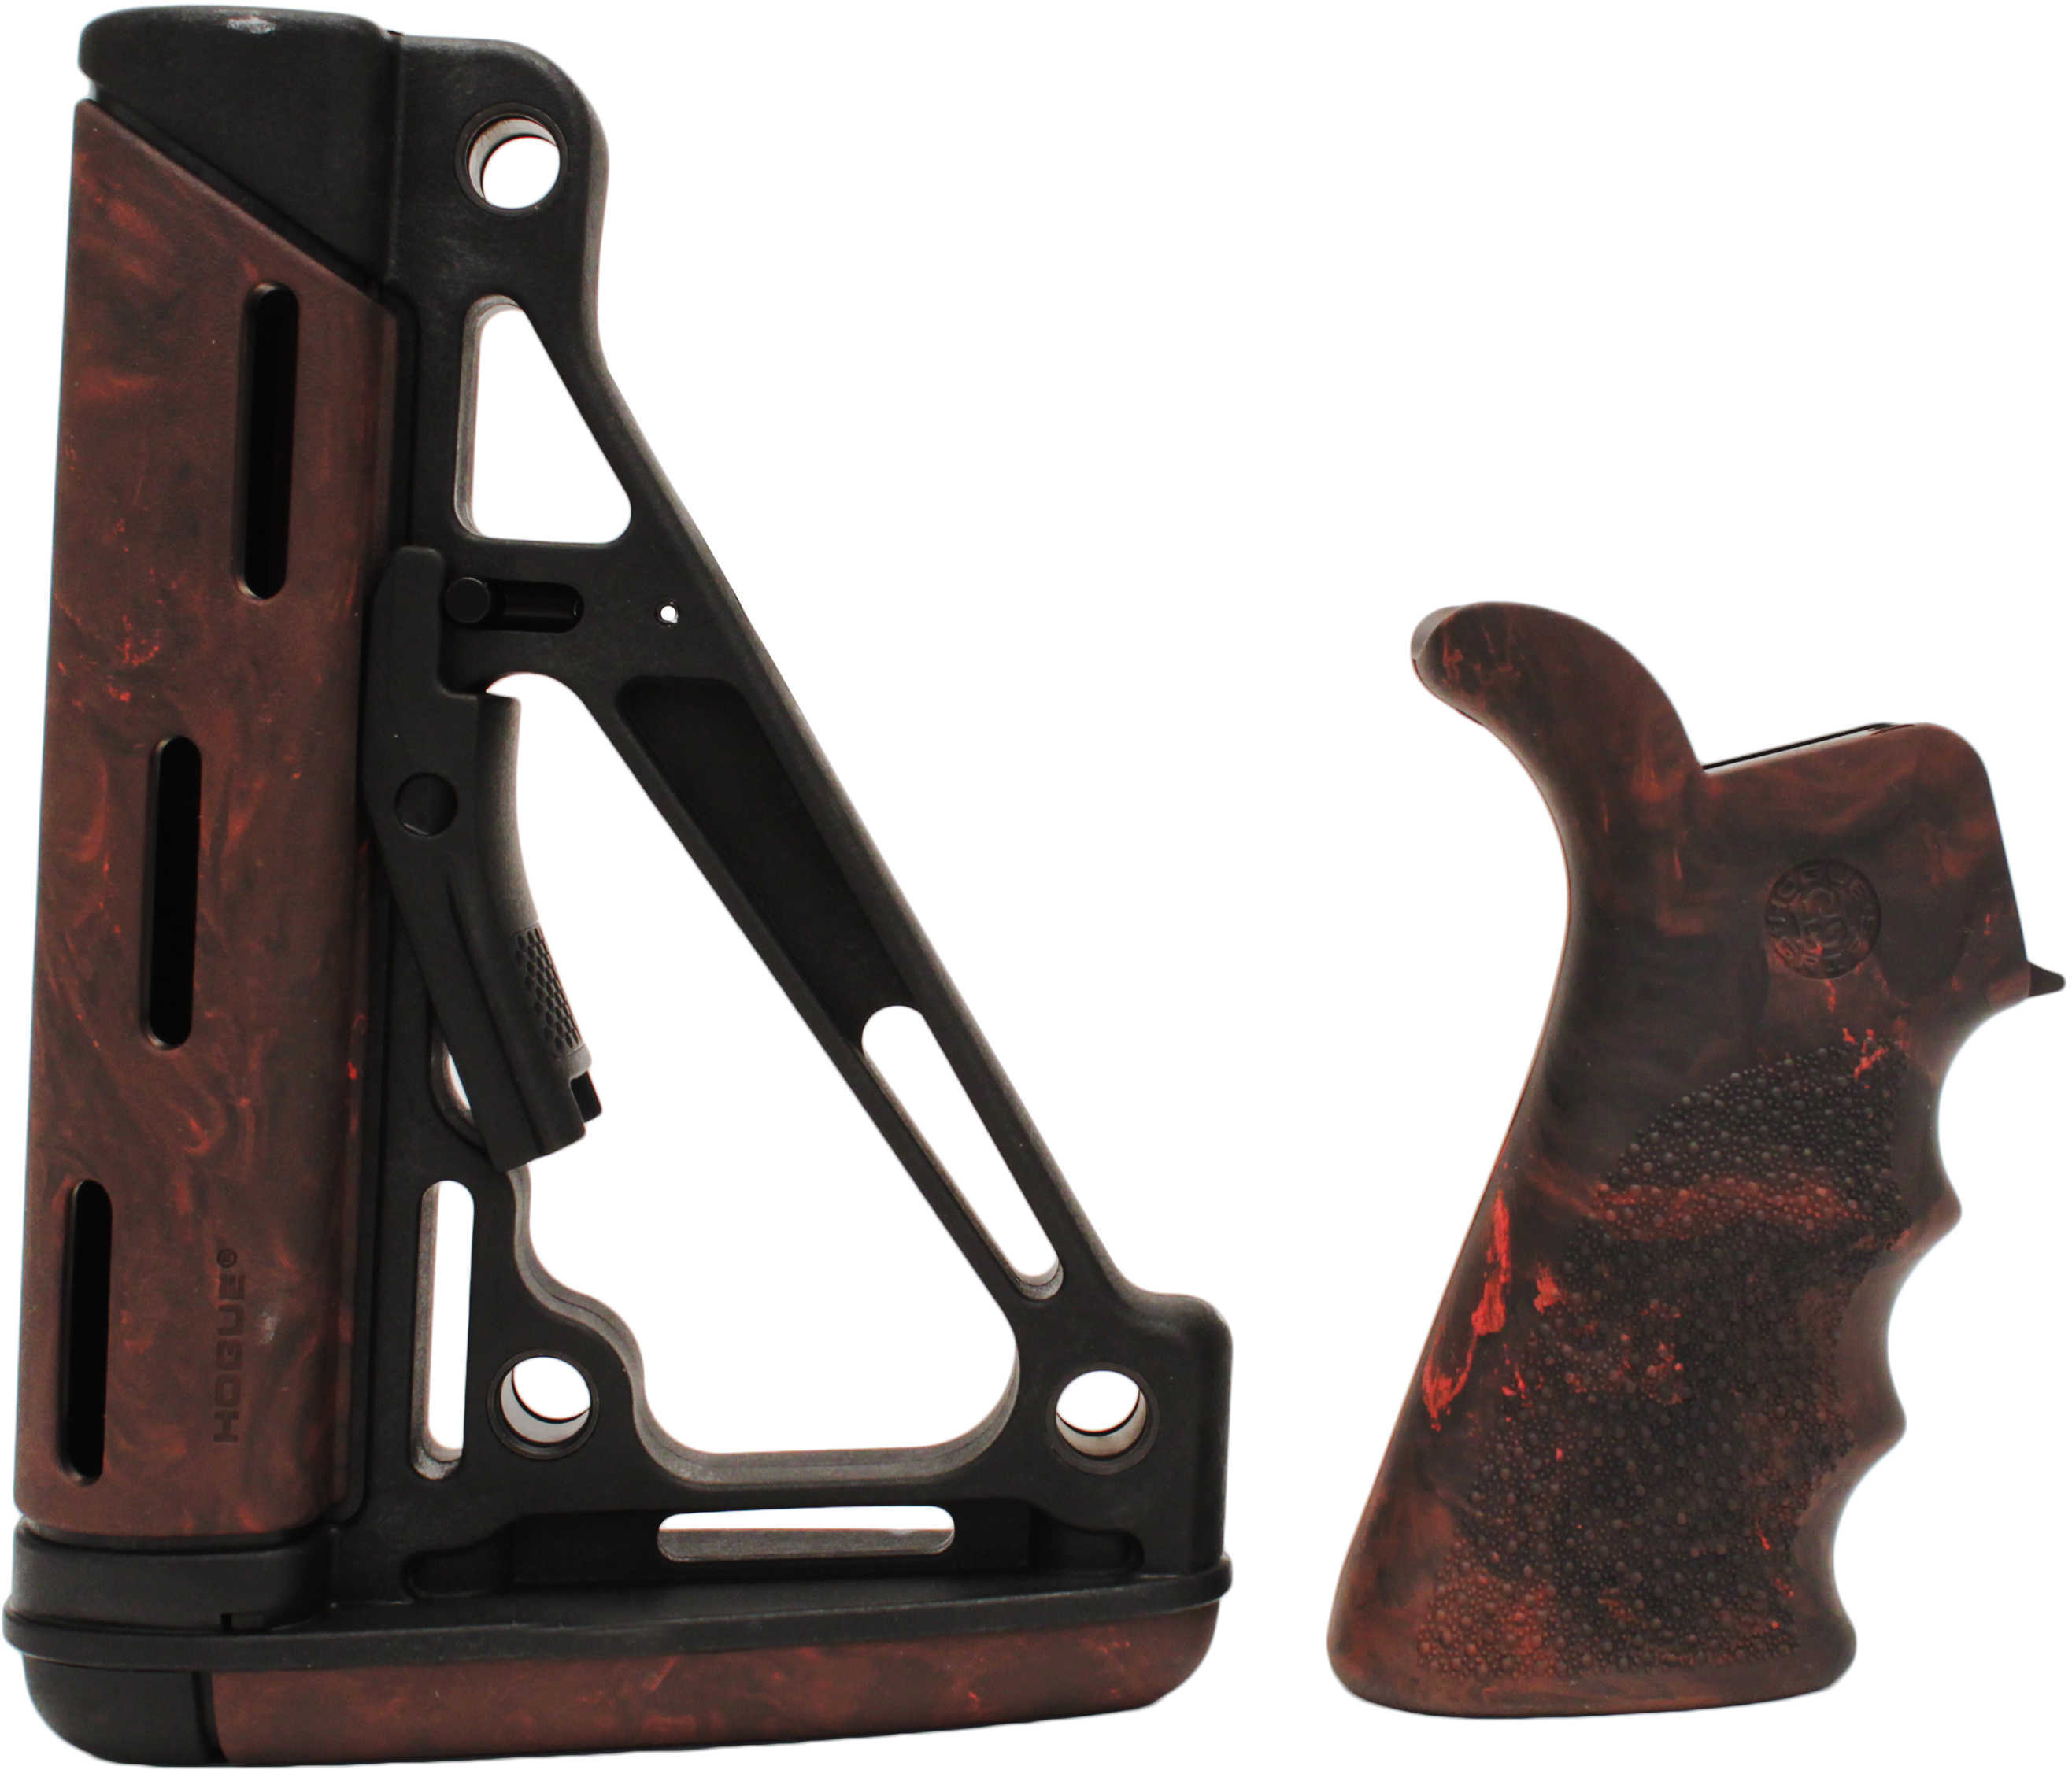 Hogue AR15 OMCB BFG Finger Groove Beavertail Grip and Overmolded Collapsible Stock Mil-Spec Red Lava Md: 1 15455